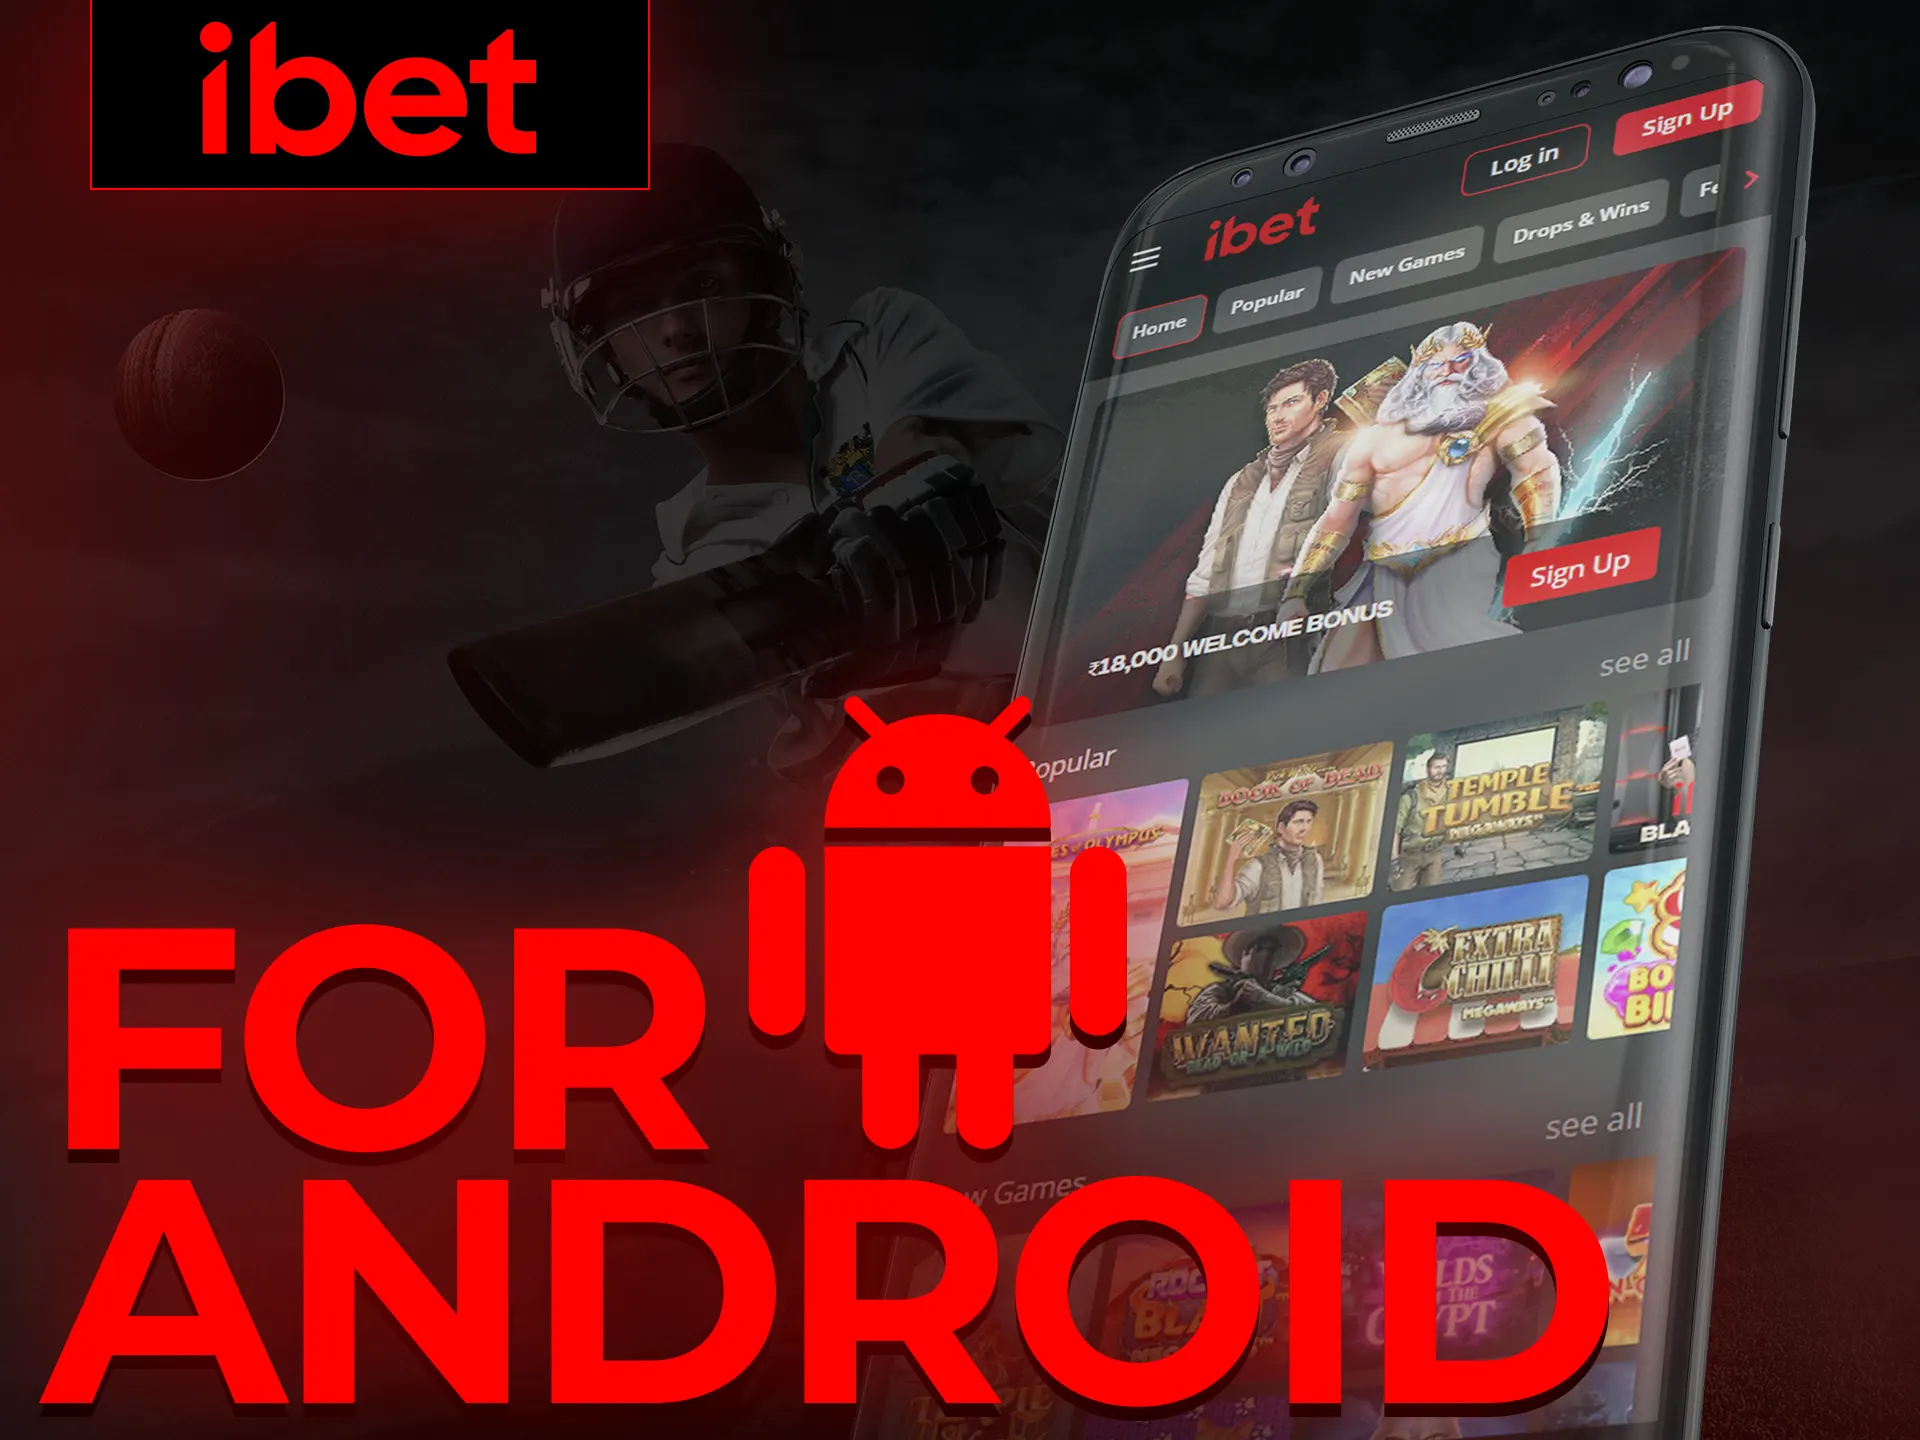 Play casino games on iBet using your Android mobile device.